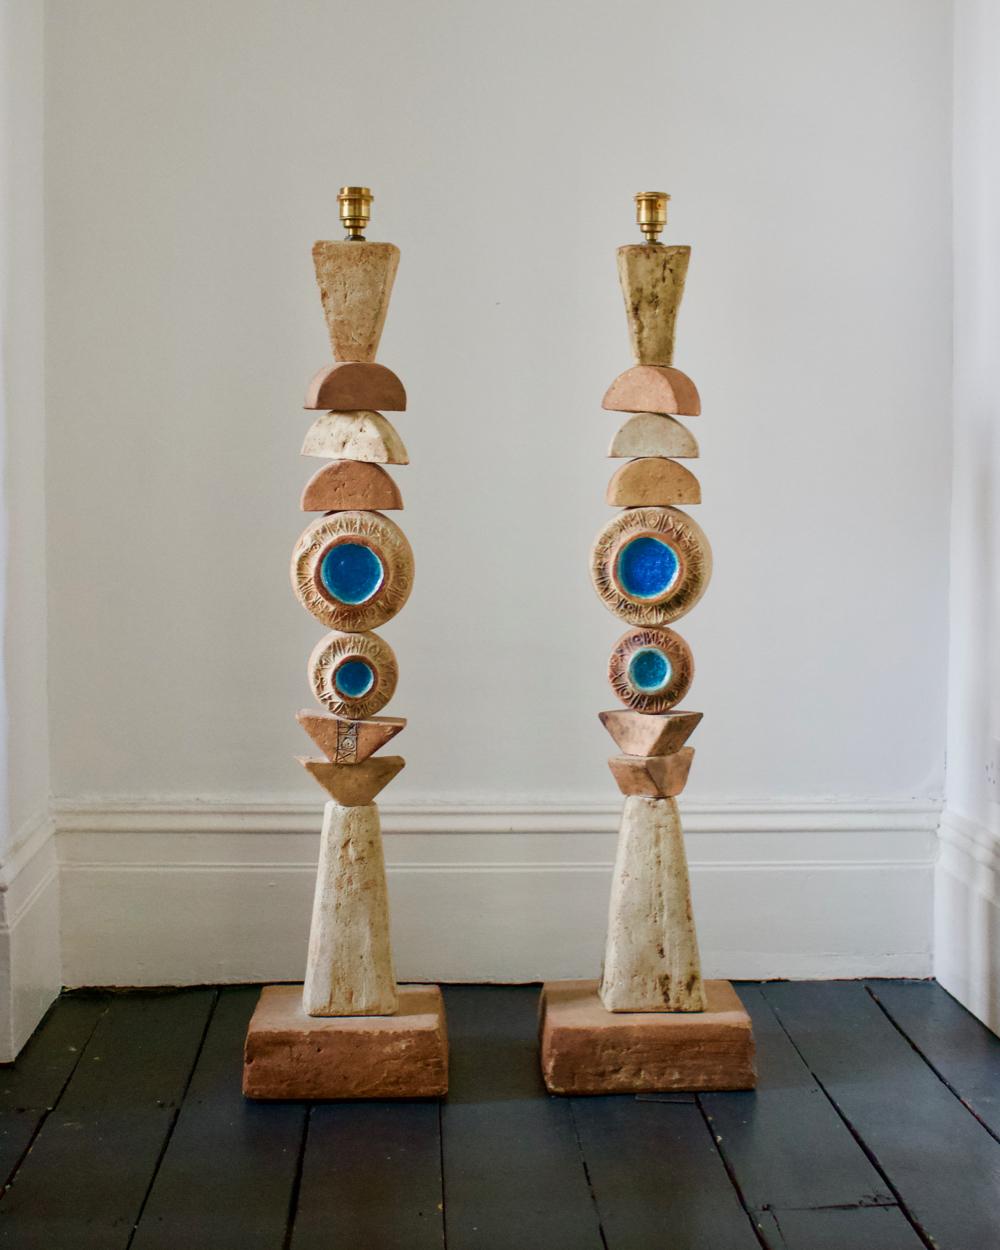 A set of two monumental mid-century Toem floor lamps by English ceramicist Bernard Rooke.

Two beautiful pieces of sculptural studio pottery - both of the same design - made up of ceramic elements in natural tones of terracotta and stone on a